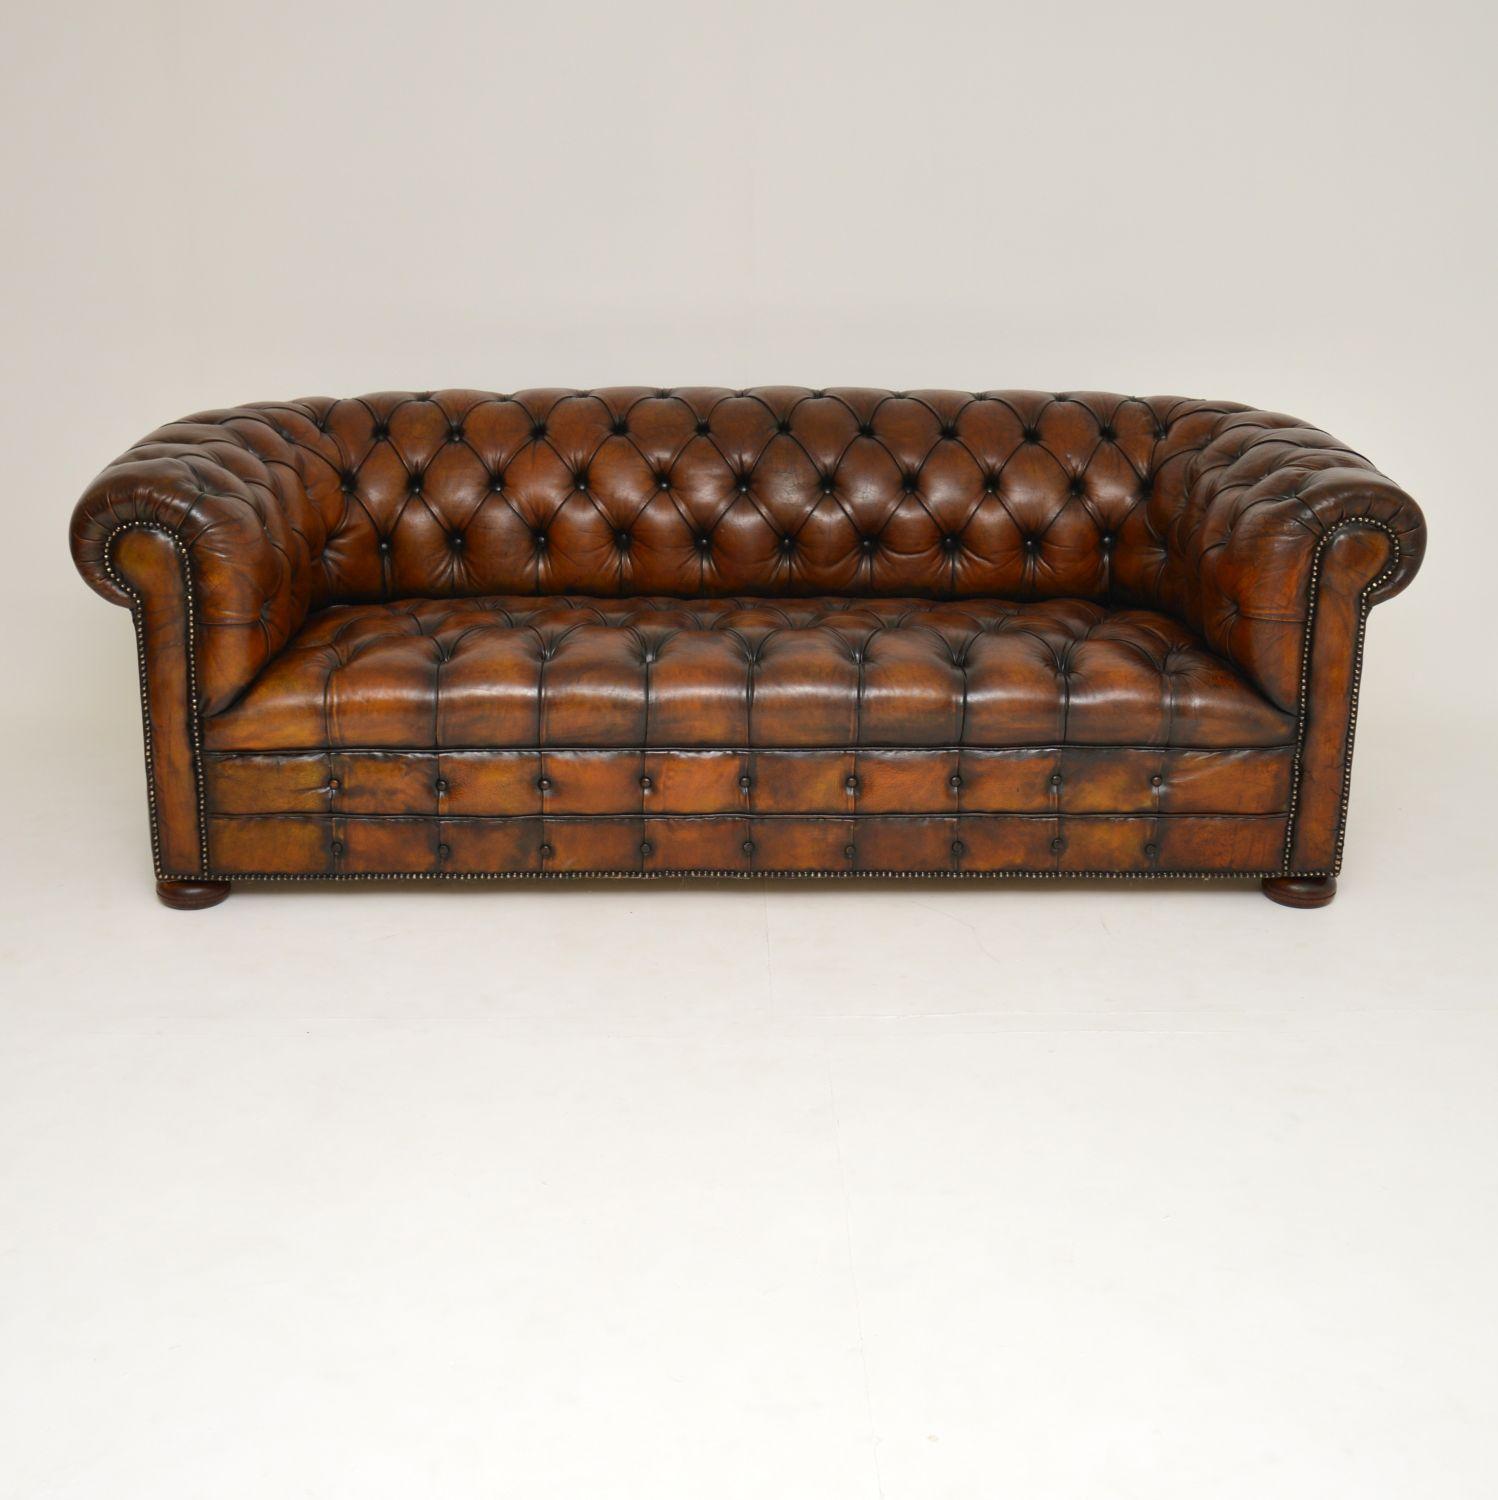 This is a very high quality antique deep buttoned leather Victorian style Chesterfield sofa and well above the average standard.

There are no splits, tears or holes and the leather has just been professionally cleaned and polished. It’s deep